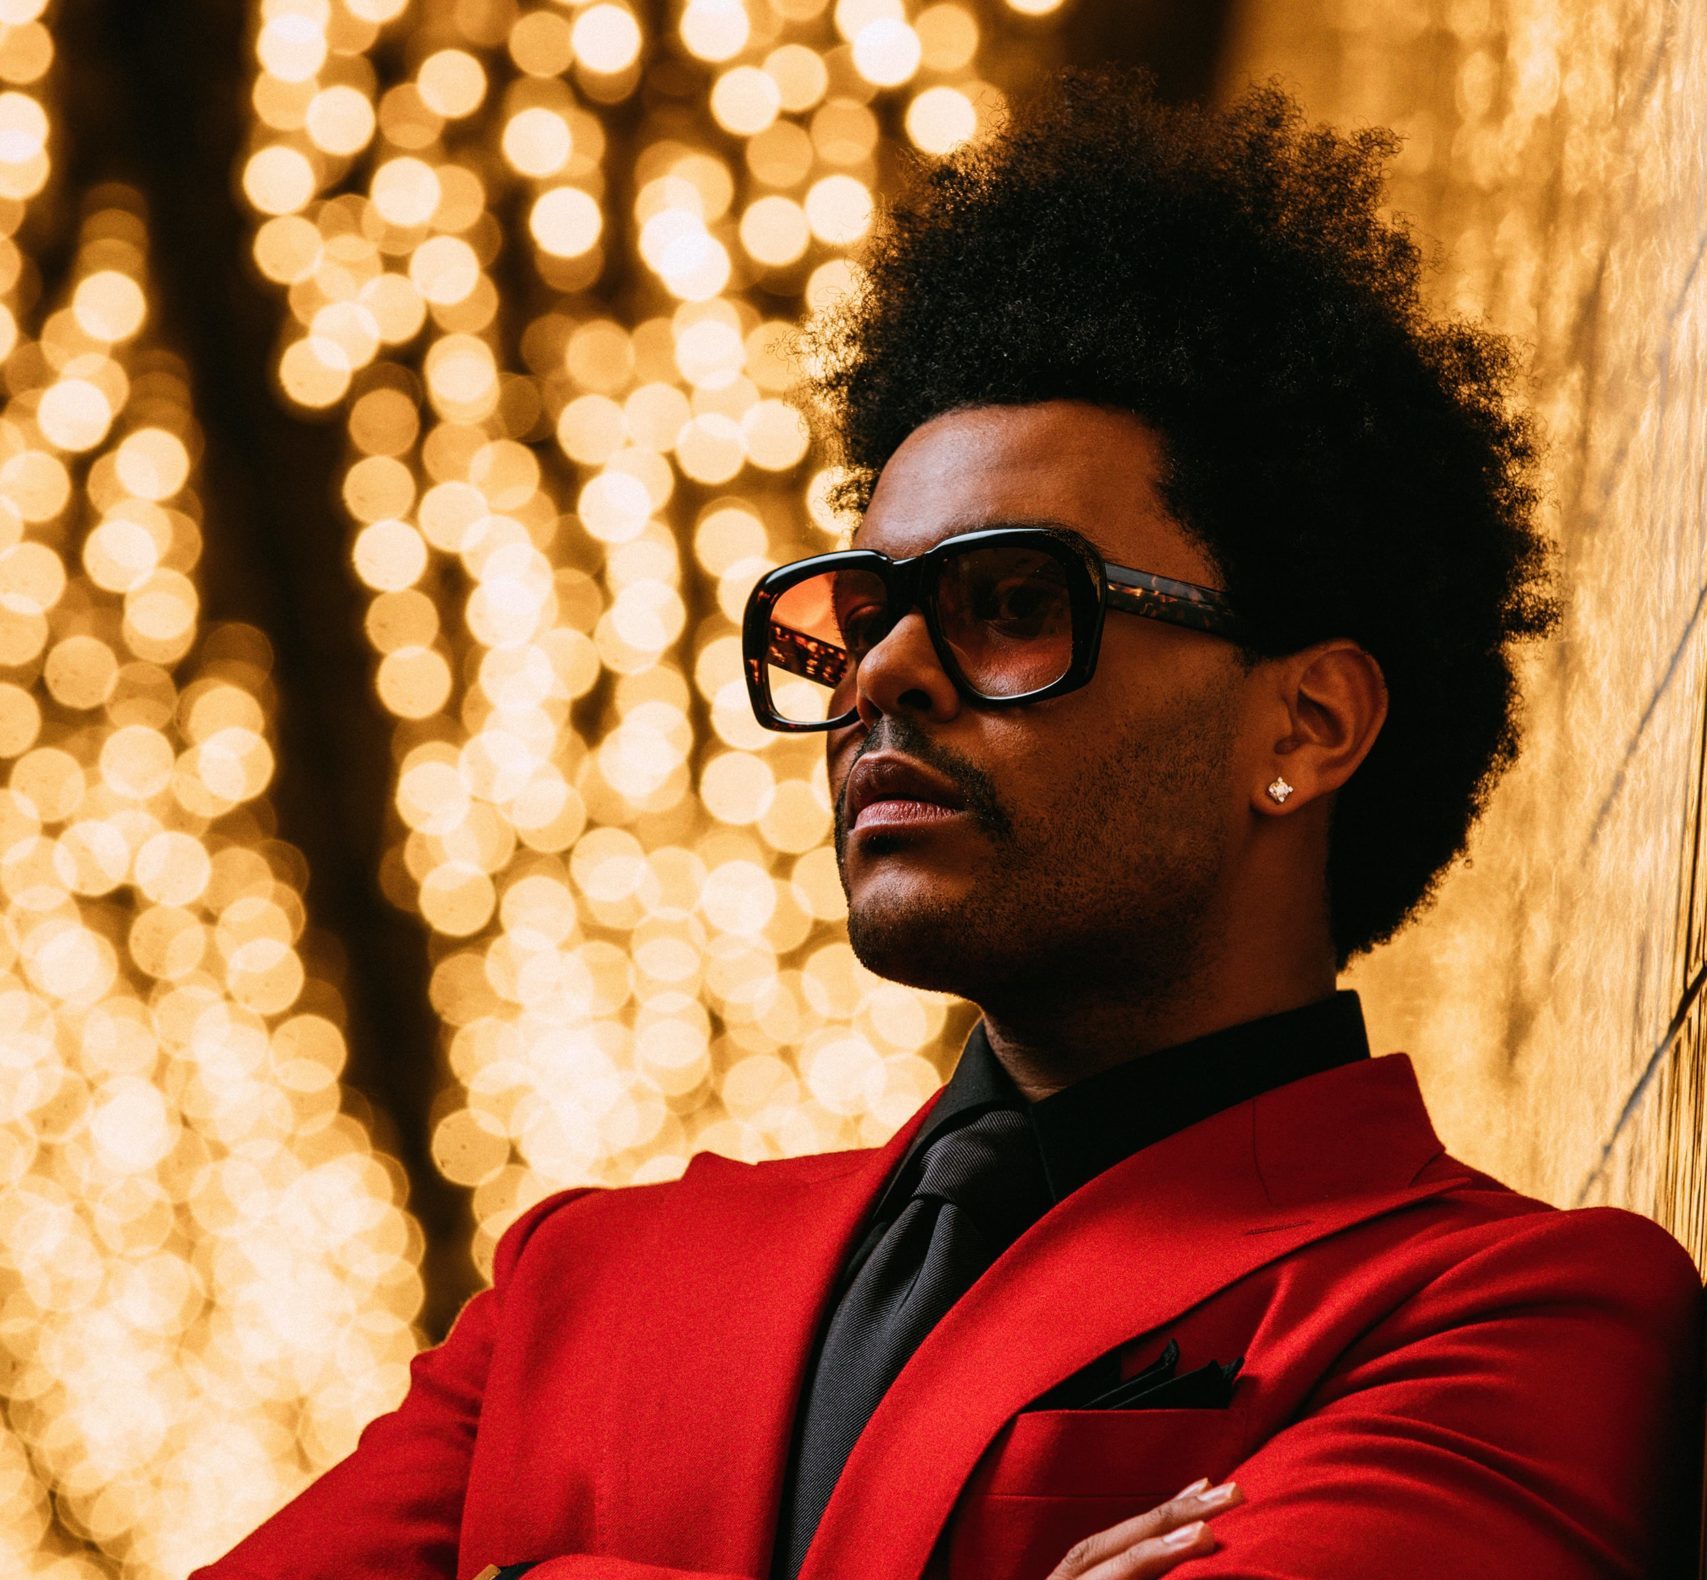 We Music: Esce il video di "Blinding Lights" di The Weeknd ...